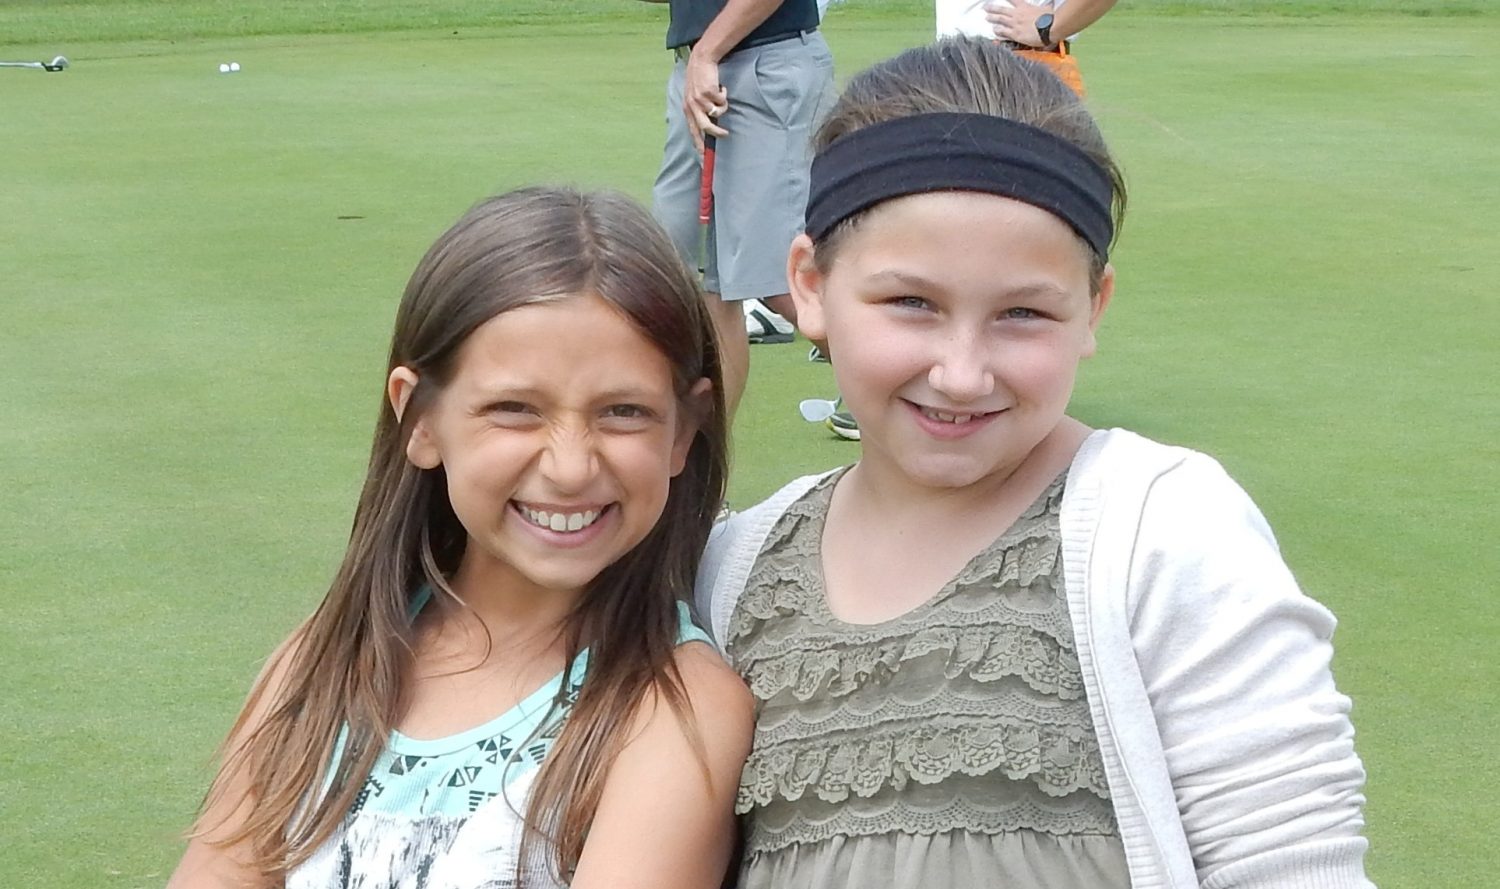 Pictured are Youth Net participants Kylie Demers (left) and Michayla Lingford at RiverEdge Golf Course last summer. The children involved in Youth Net received golf lessons on this day.